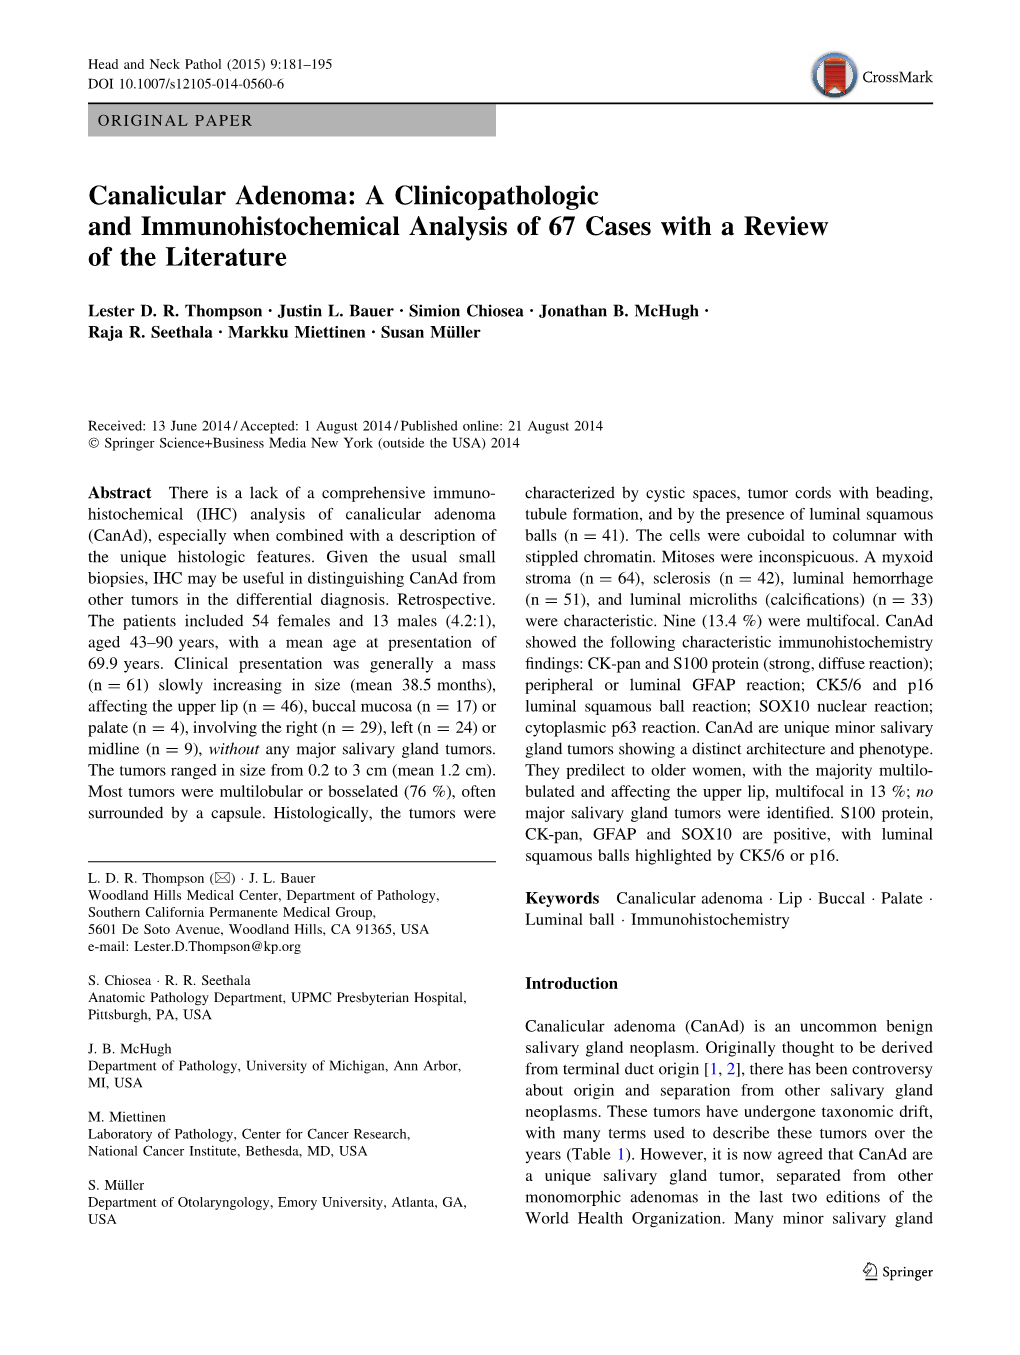 Canalicular Adenoma: a Clinicopathologic and Immunohistochemical Analysis of 67 Cases with a Review of the Literature